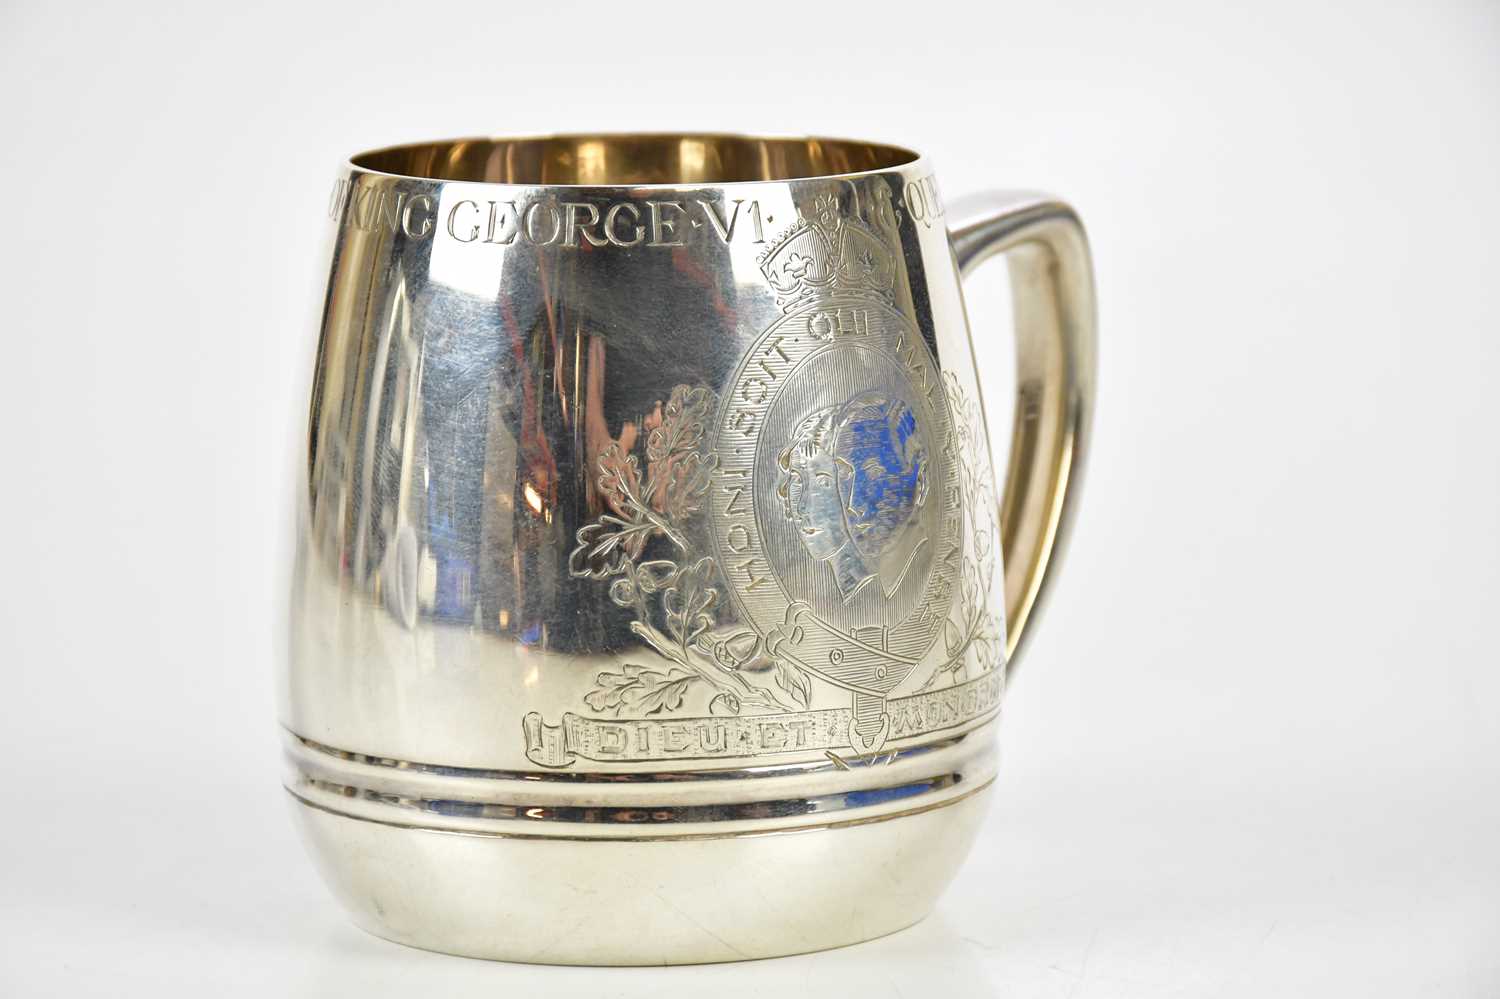 H PIDDUCK & SONS; a George VI hallmarked silver Royal commemorative mug, Sheffield 1937, approx 11. - Image 2 of 3